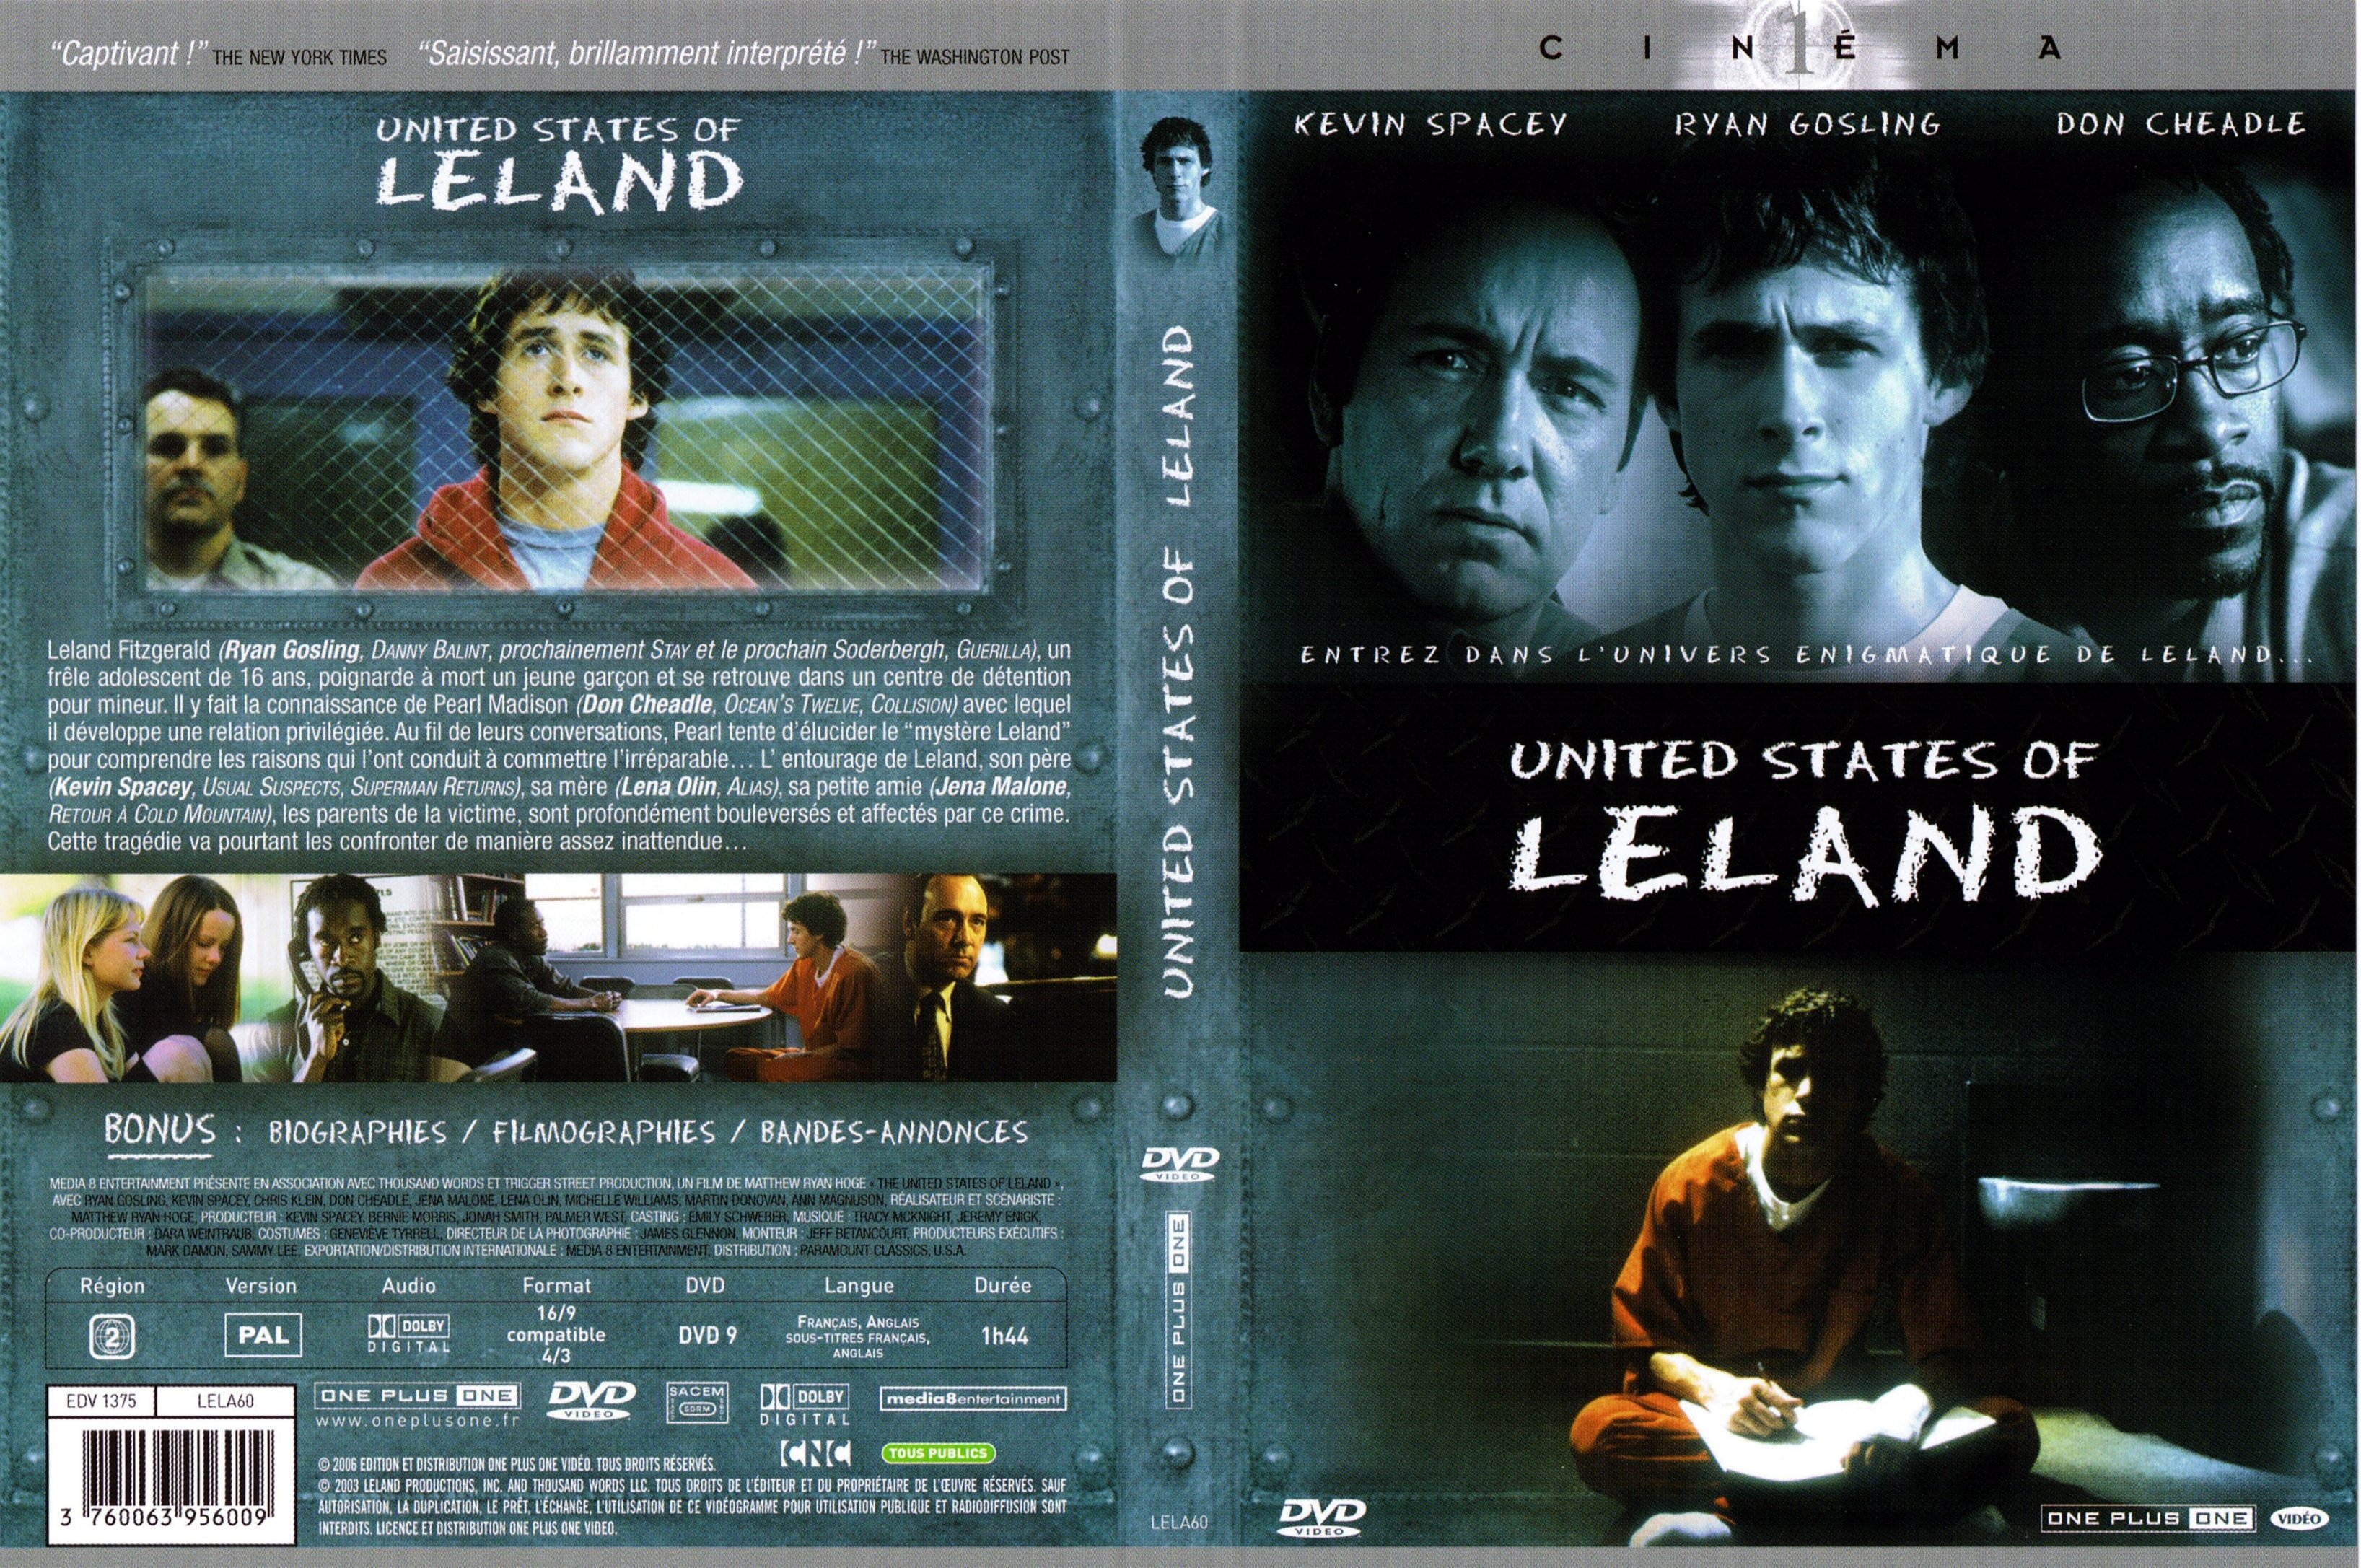 Jaquette DVD United states of leland